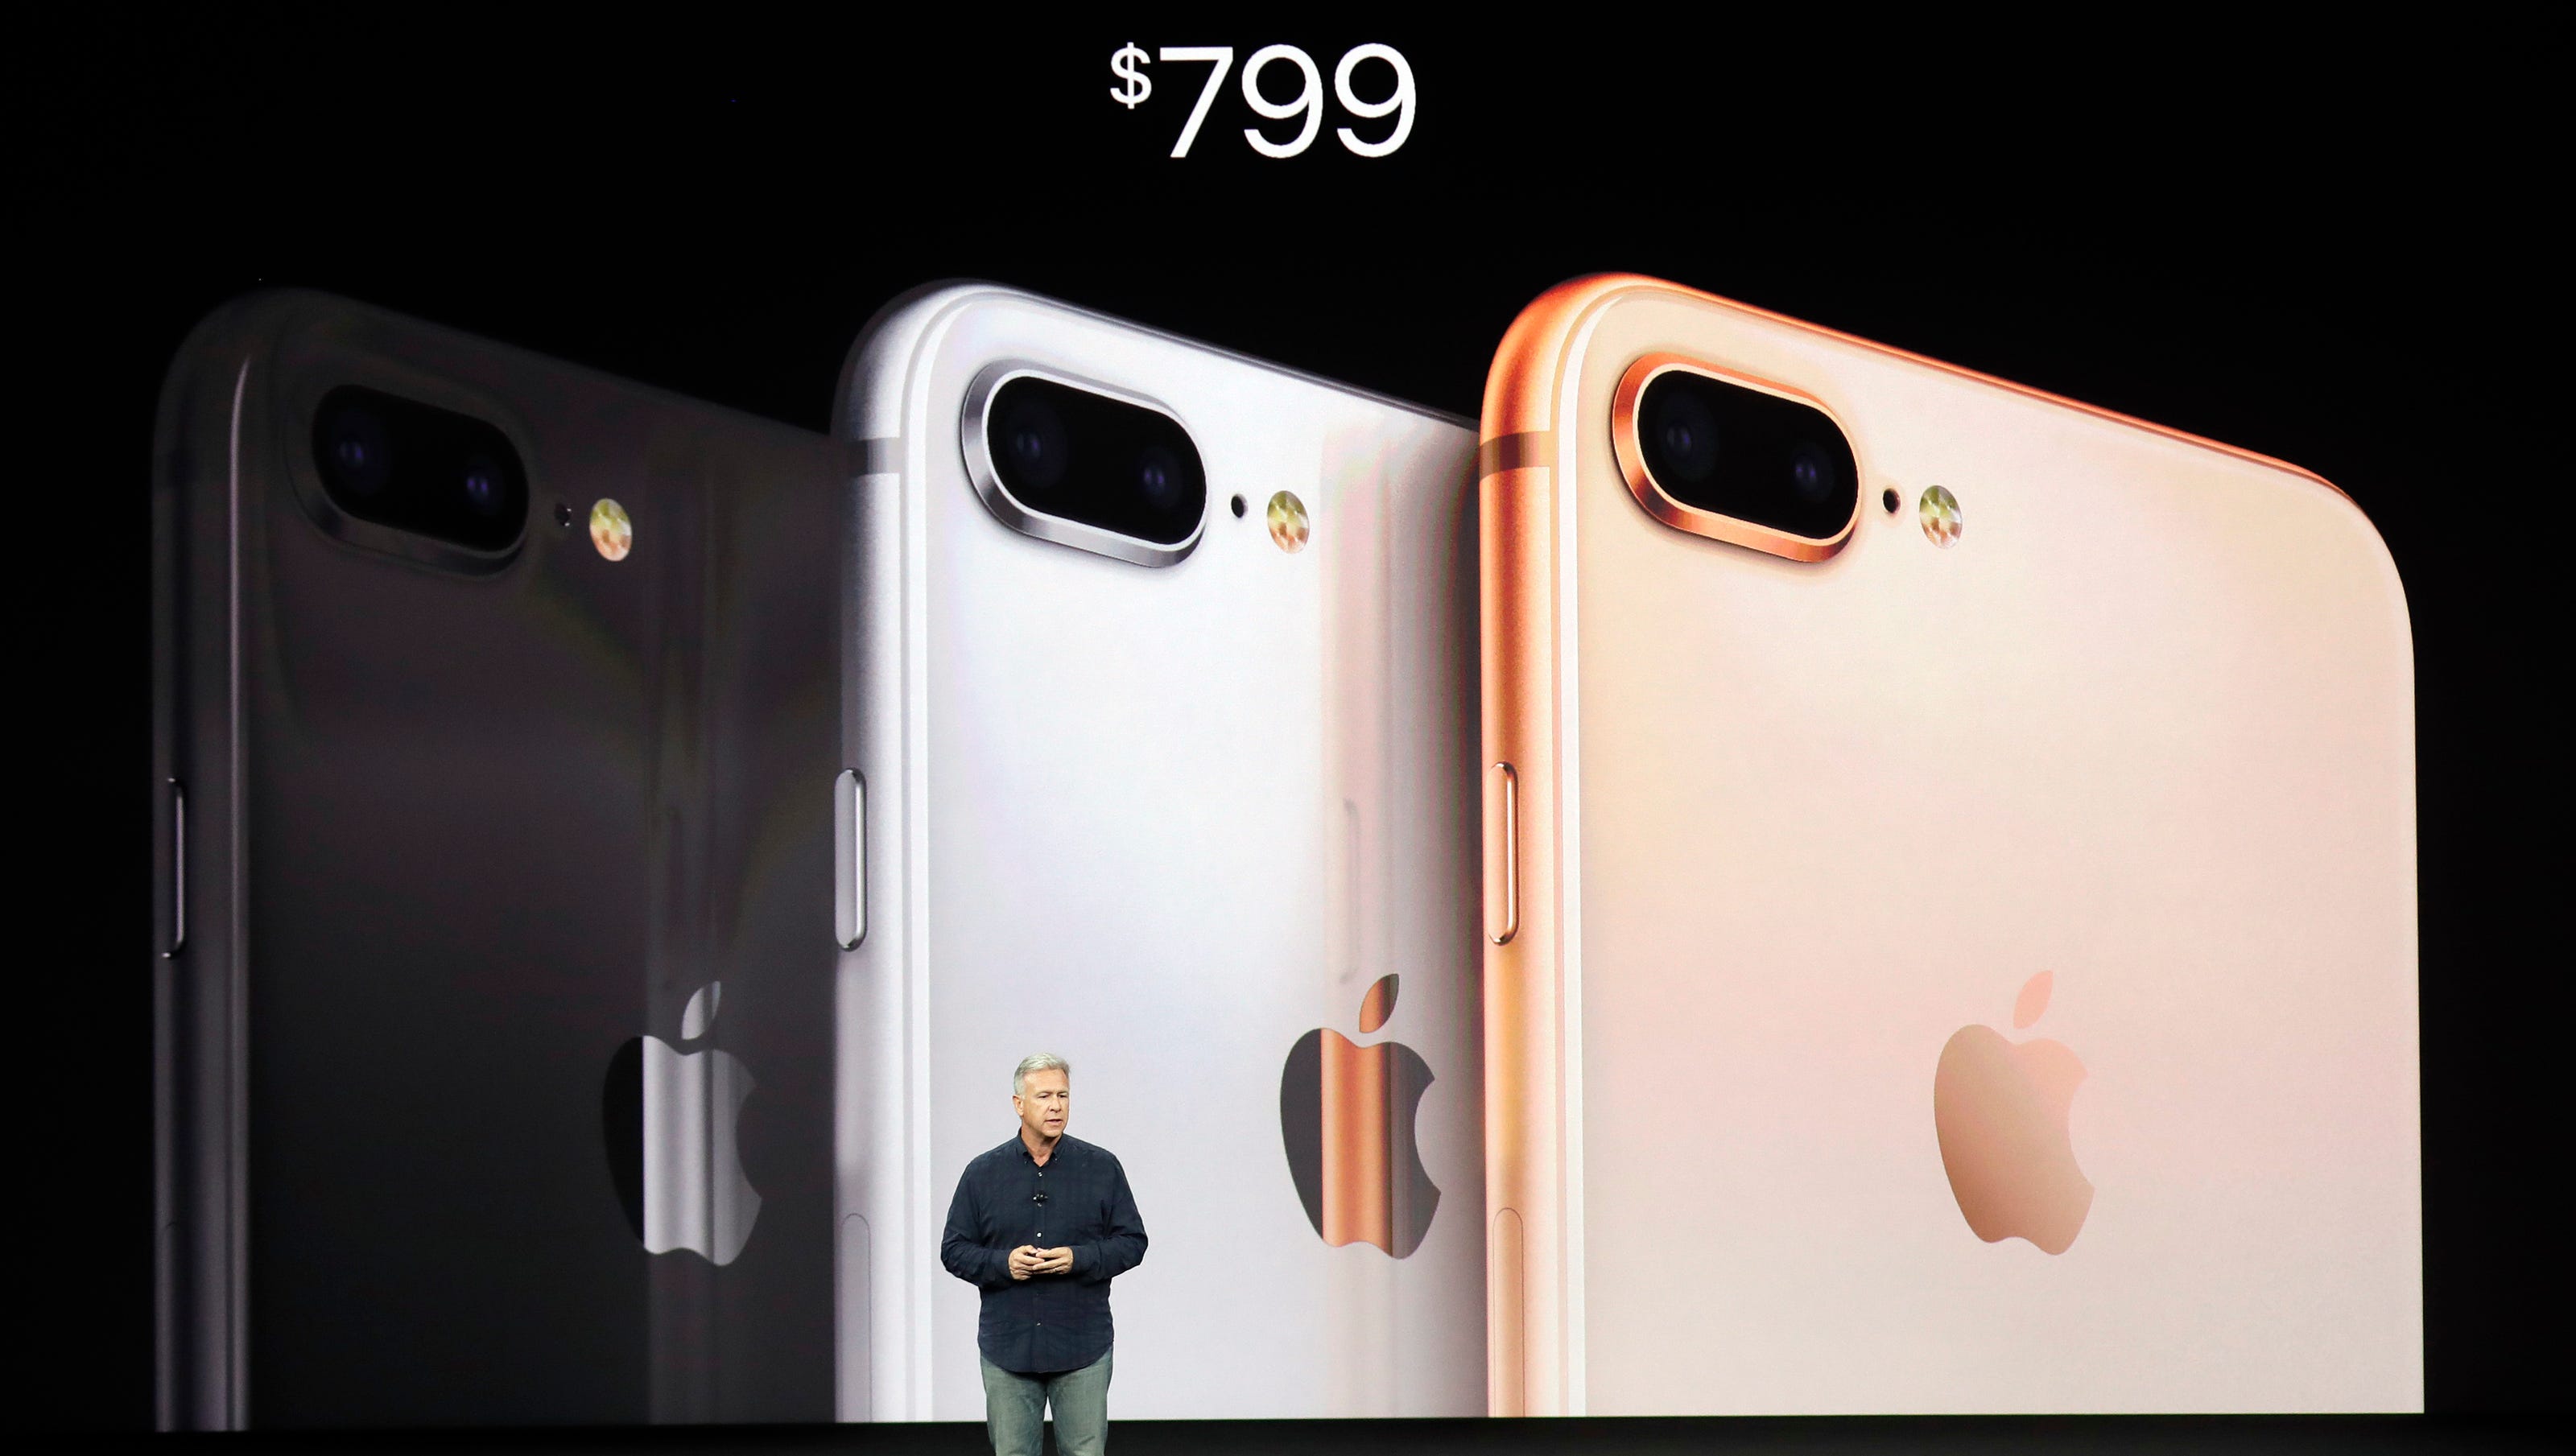 iPhone X pricing, features iPhone 8